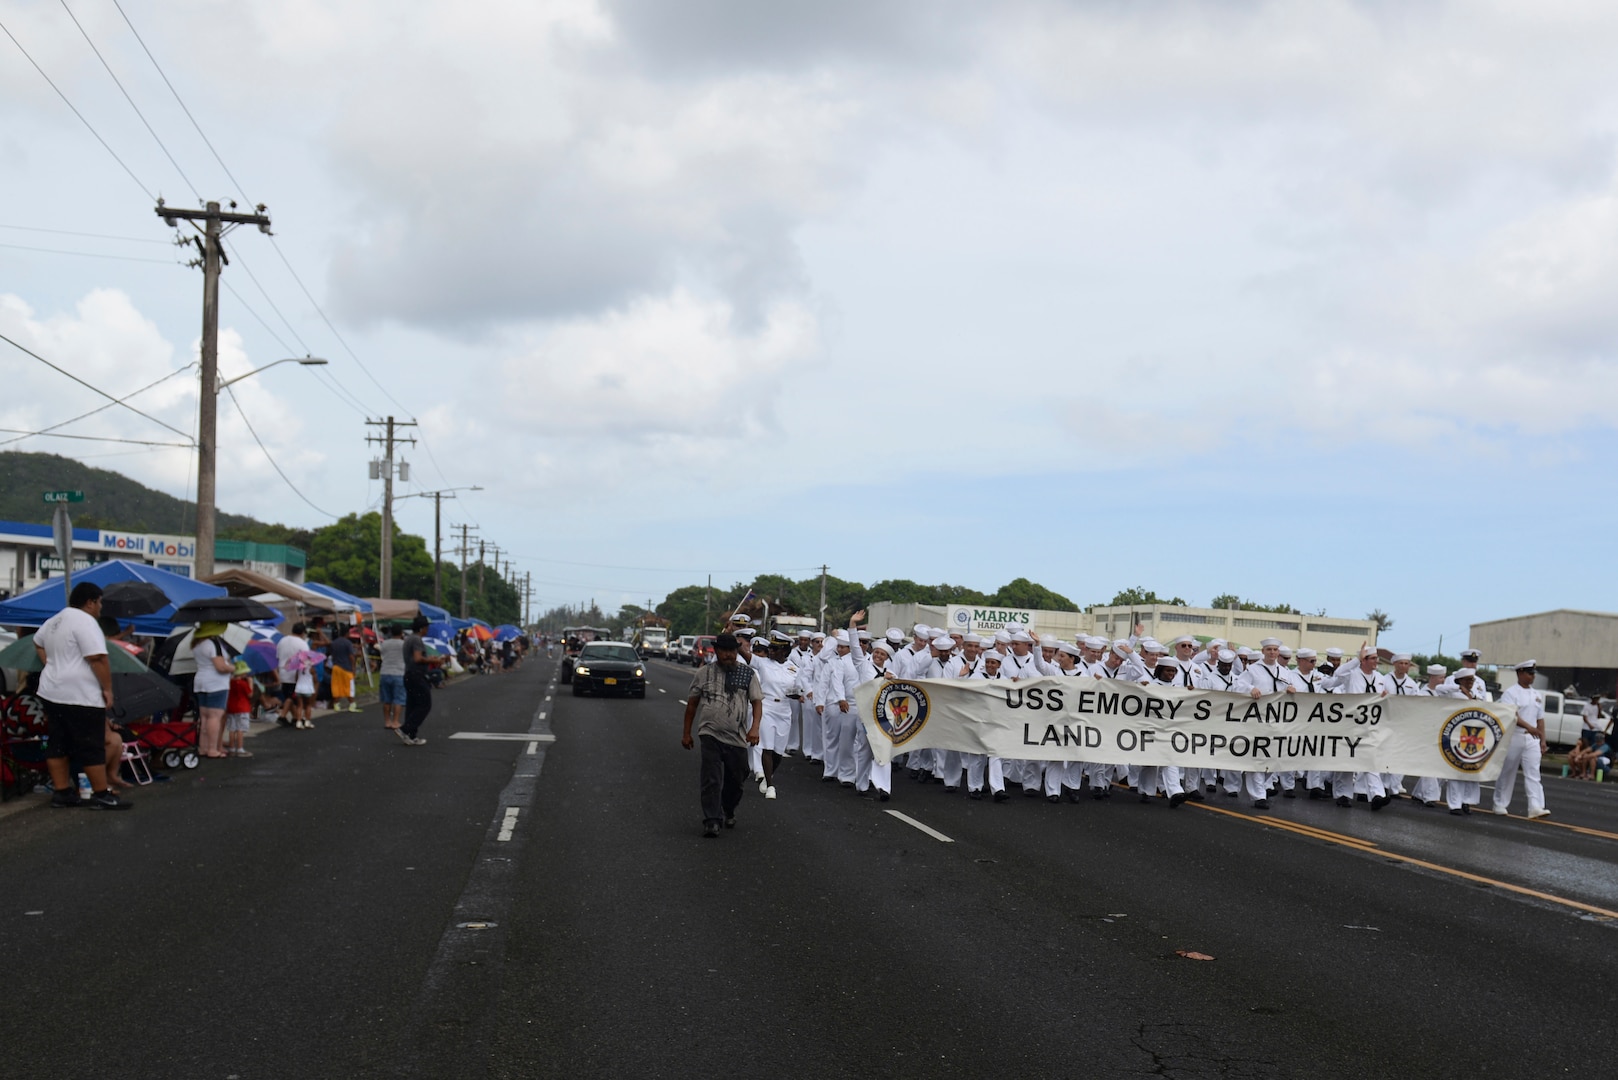 U.S. Sailors assigned to the USS Emory S. Land greet bystanders during the 73rd Guam Liberation Day parade July 21, 2017, in Hagåtña, Guam. The parade commemorated 73 years since U.S. armed forces liberated the island from Japanese control during World War II. (U.S. Air Force photo by Airman 1st Class Gerald R. Willis)